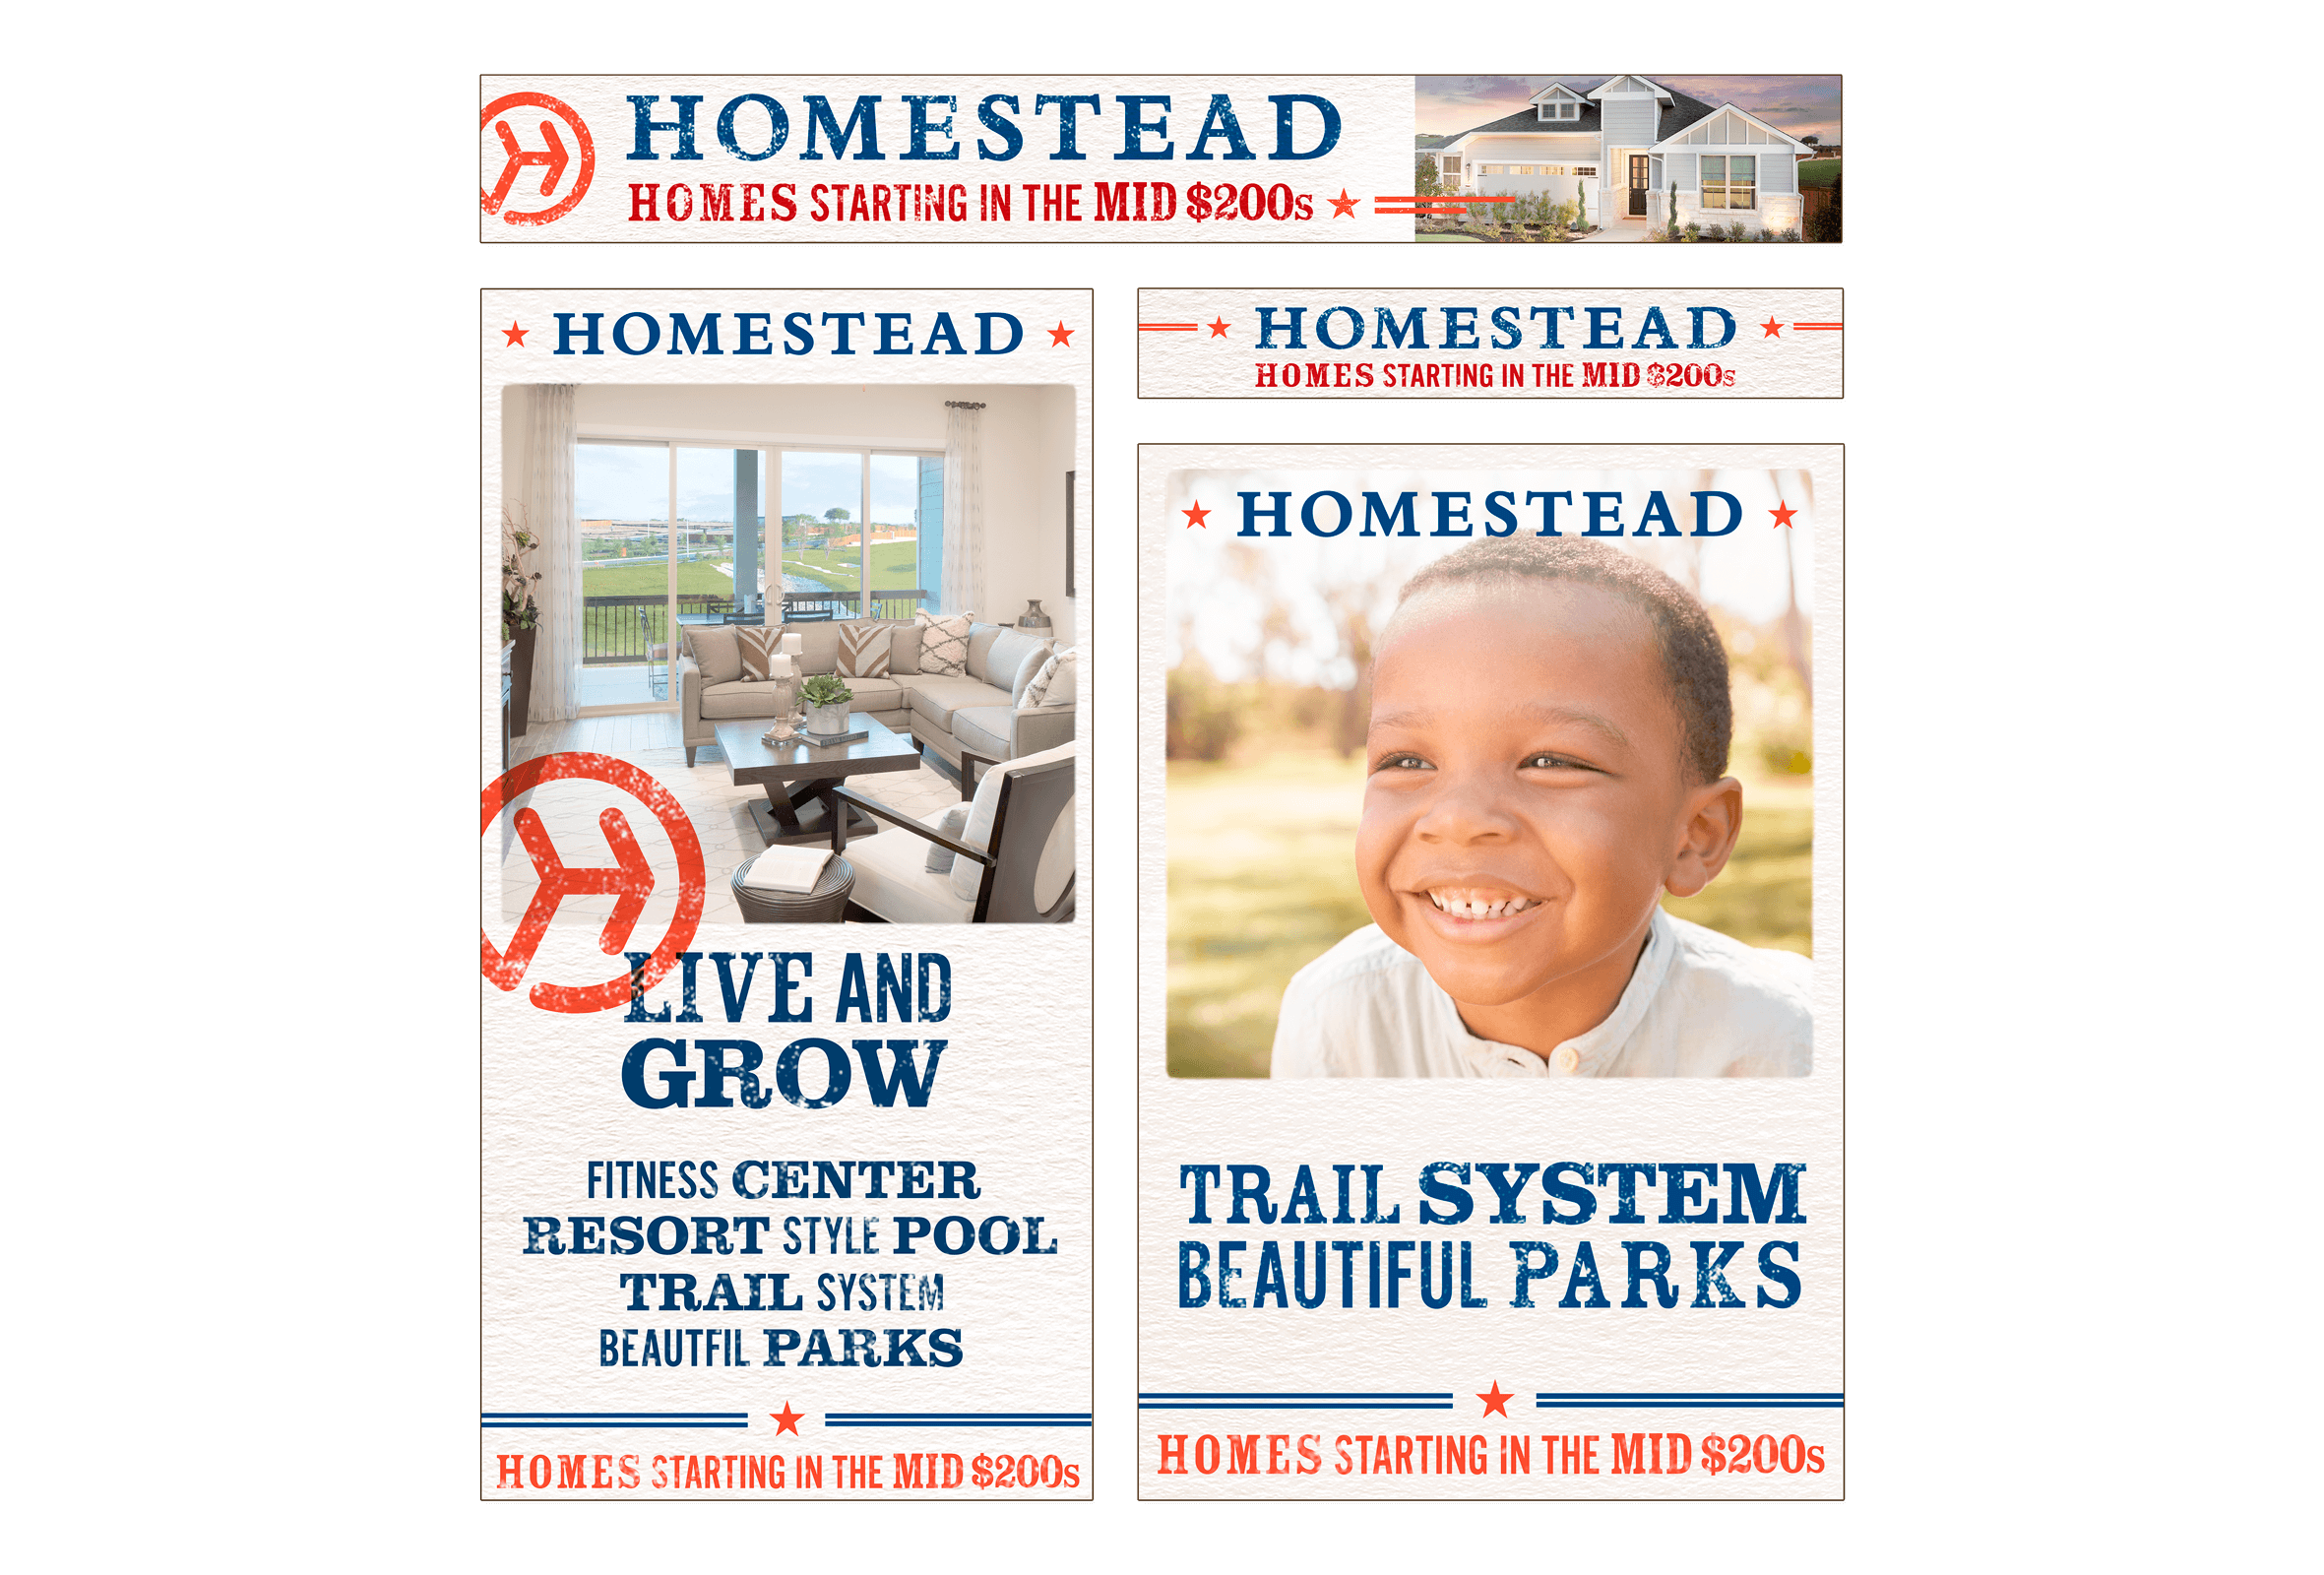 Digital Ads for Homestead living community in Texas